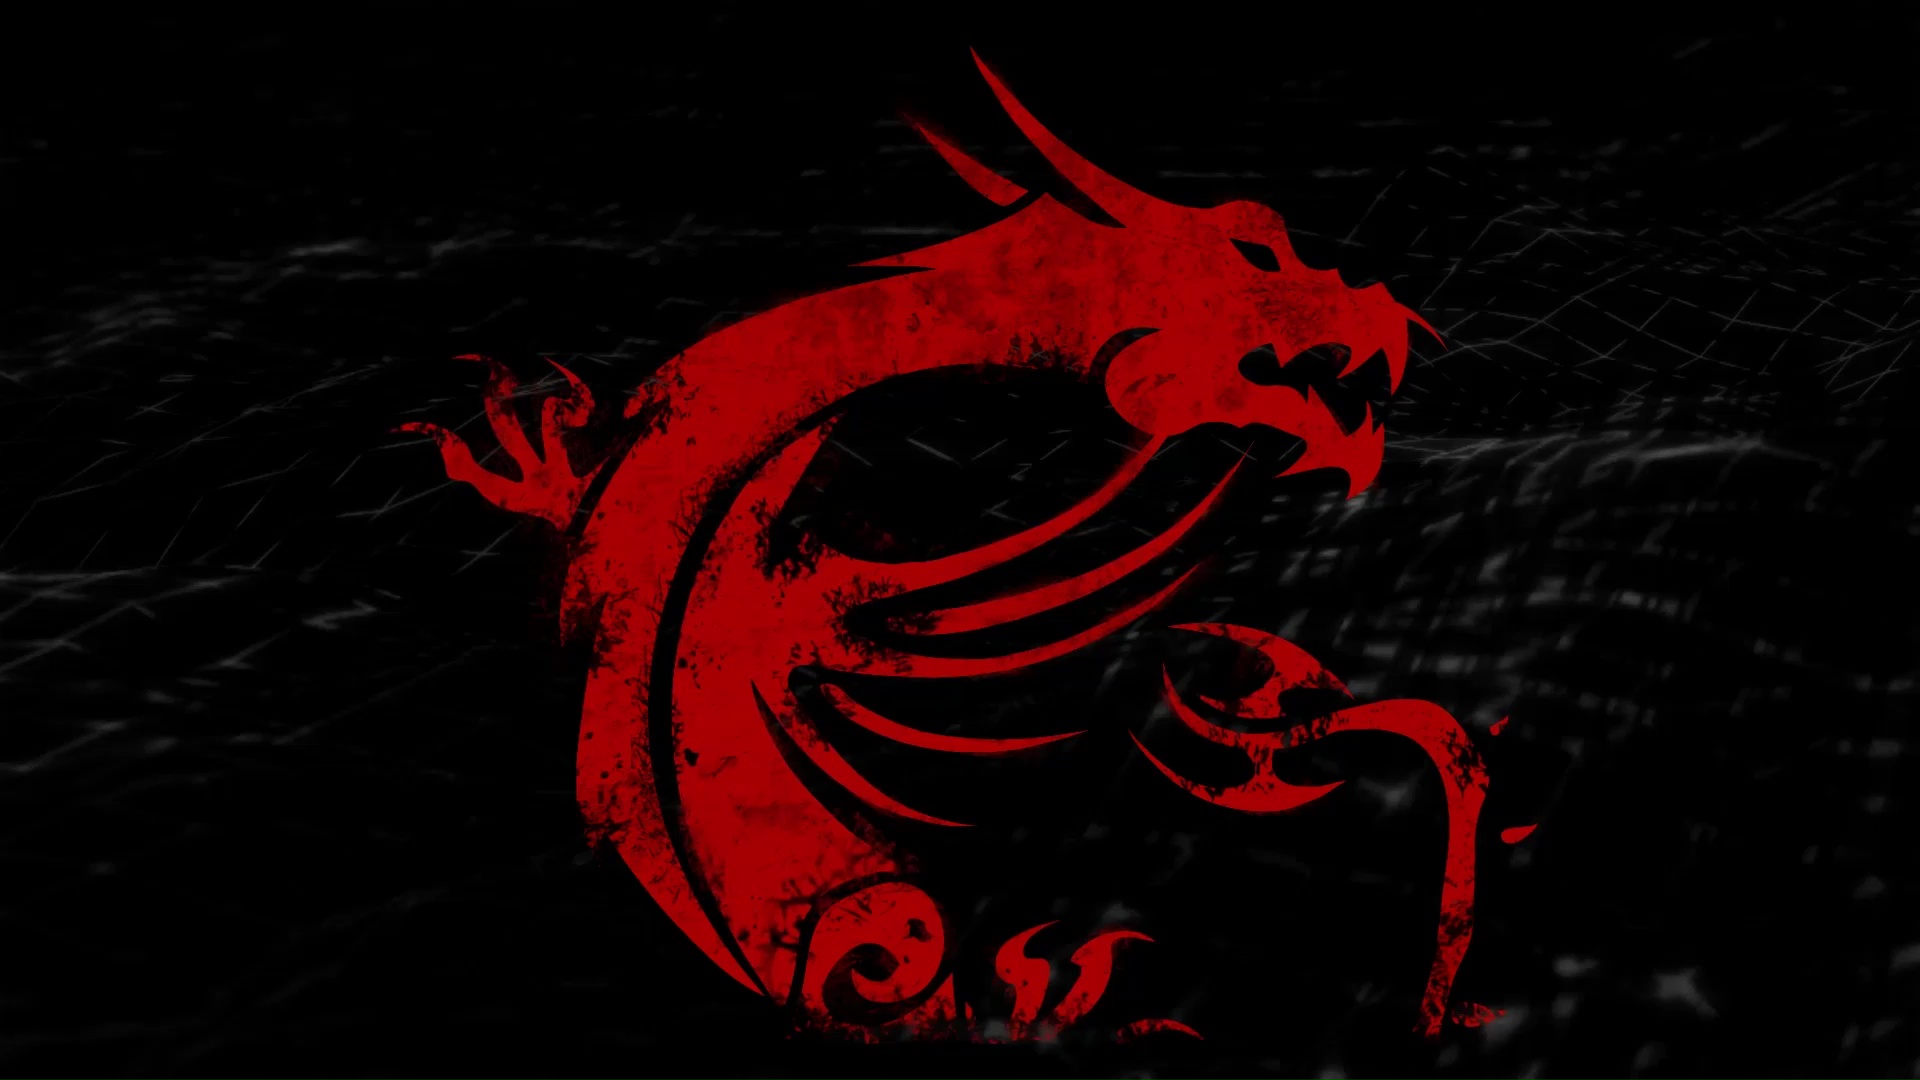 Dark Dragon Wallpapers On Black And White Background, Dragon Pictures Black  And White Background Image And Wallpaper for Free Download